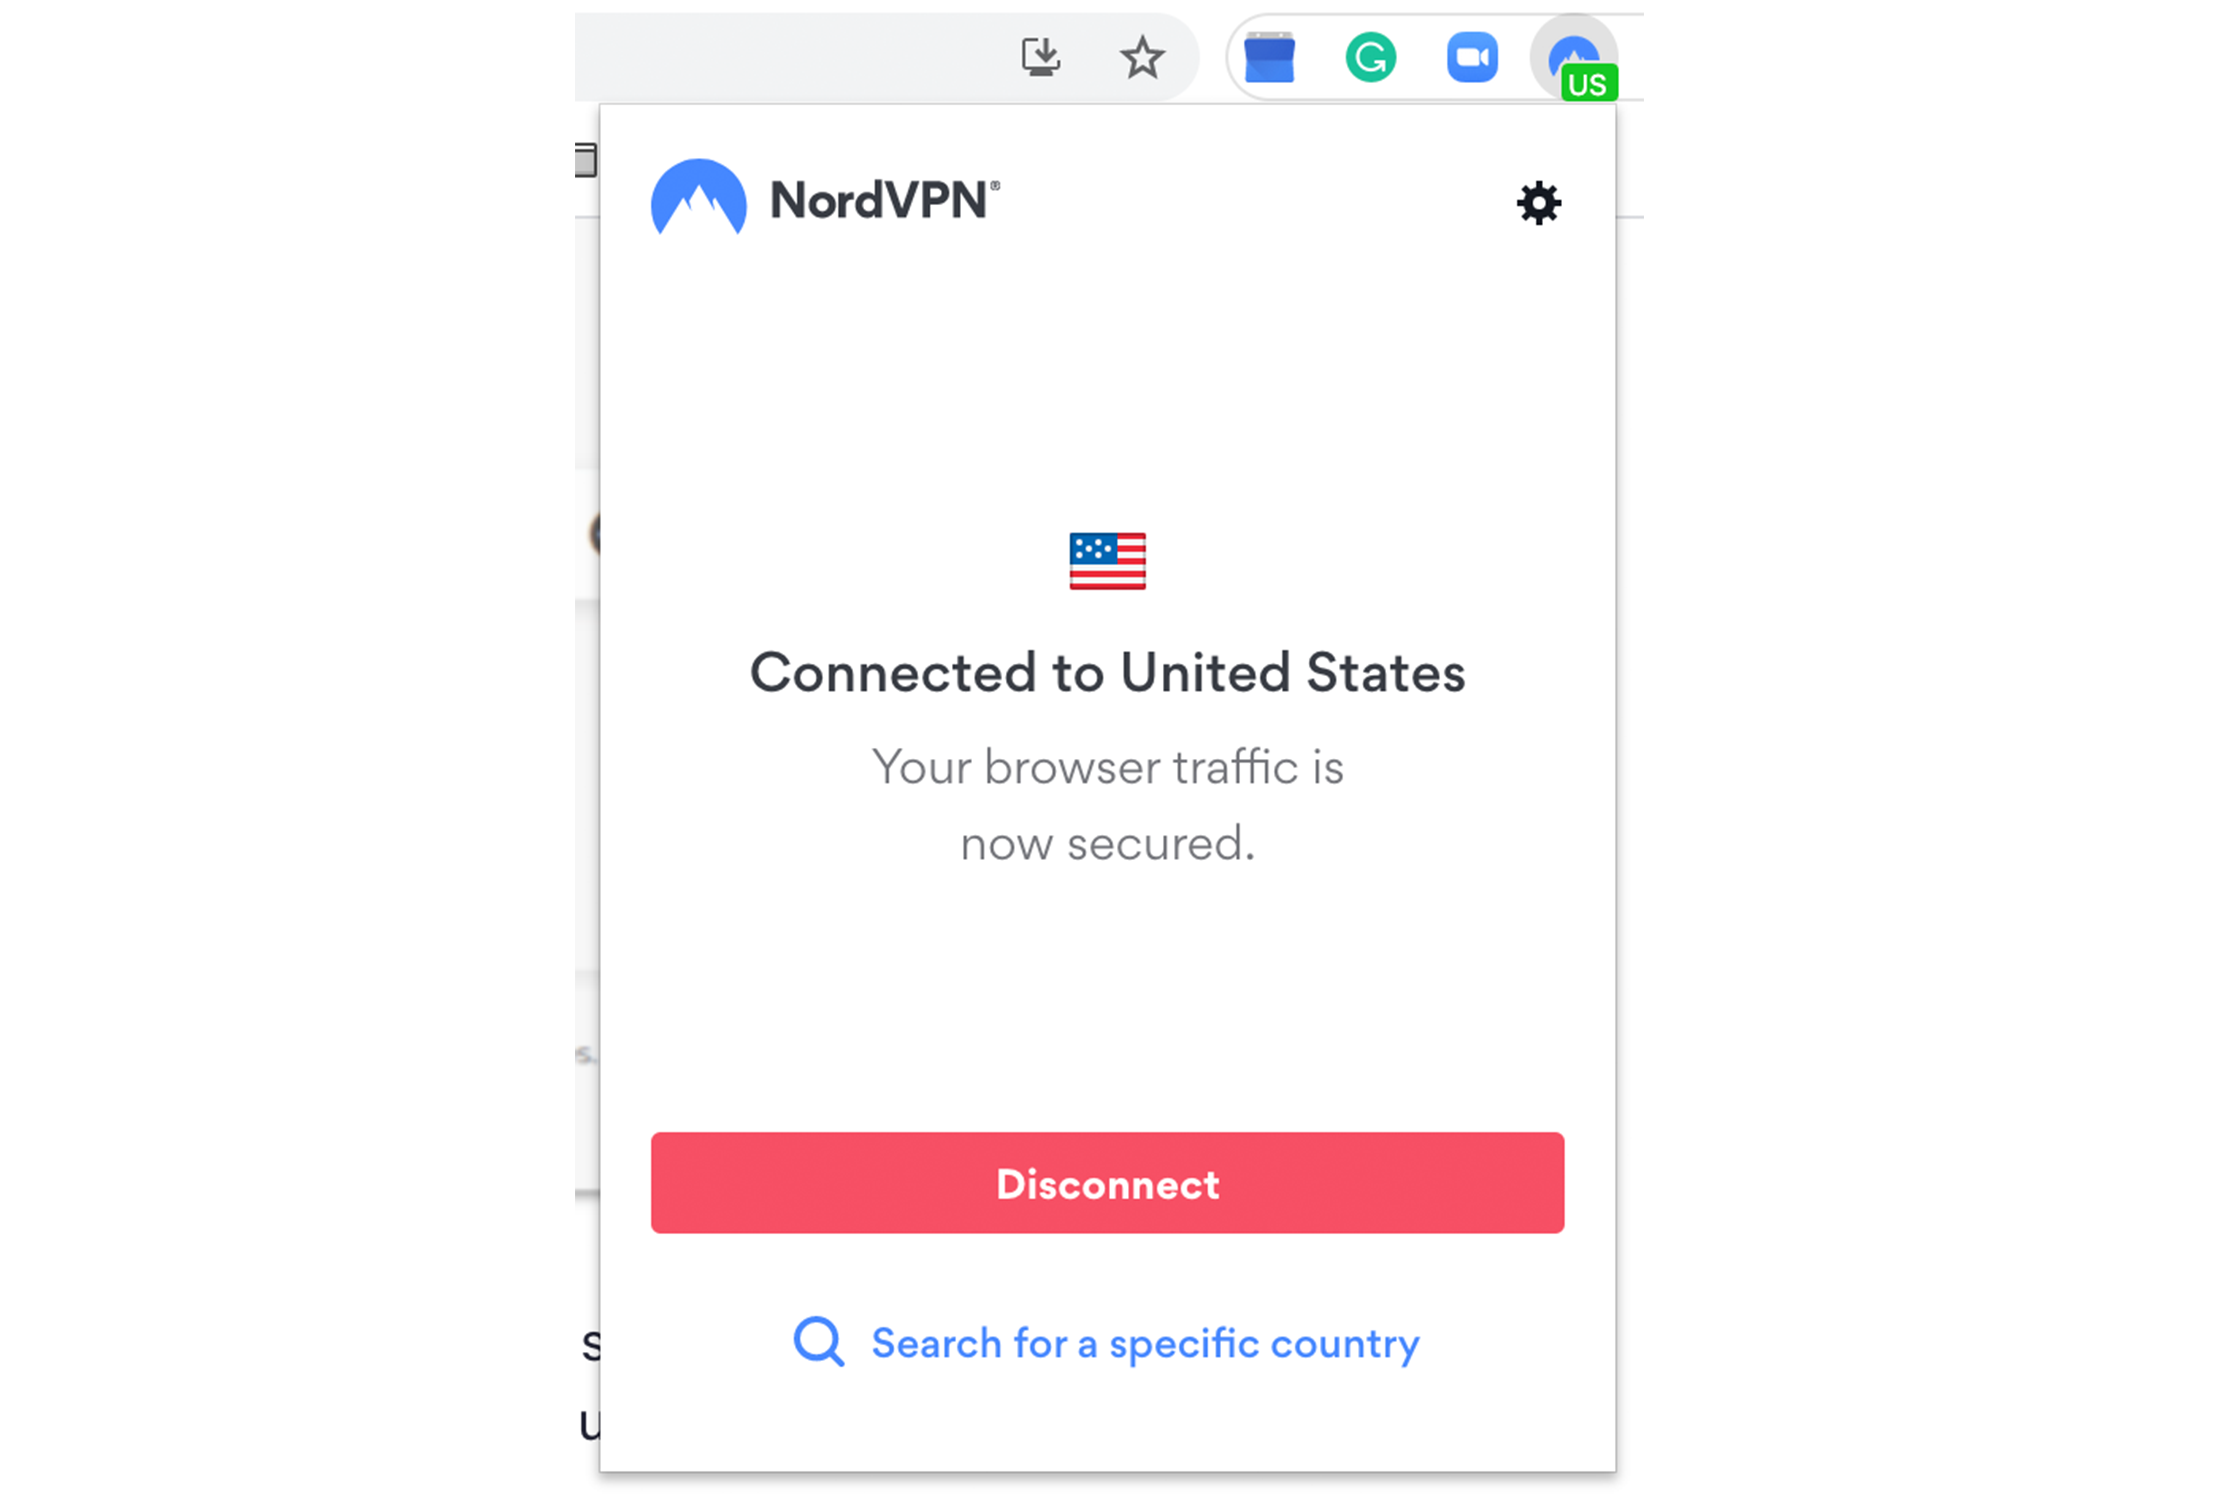 Disconnecting from NordVPN server